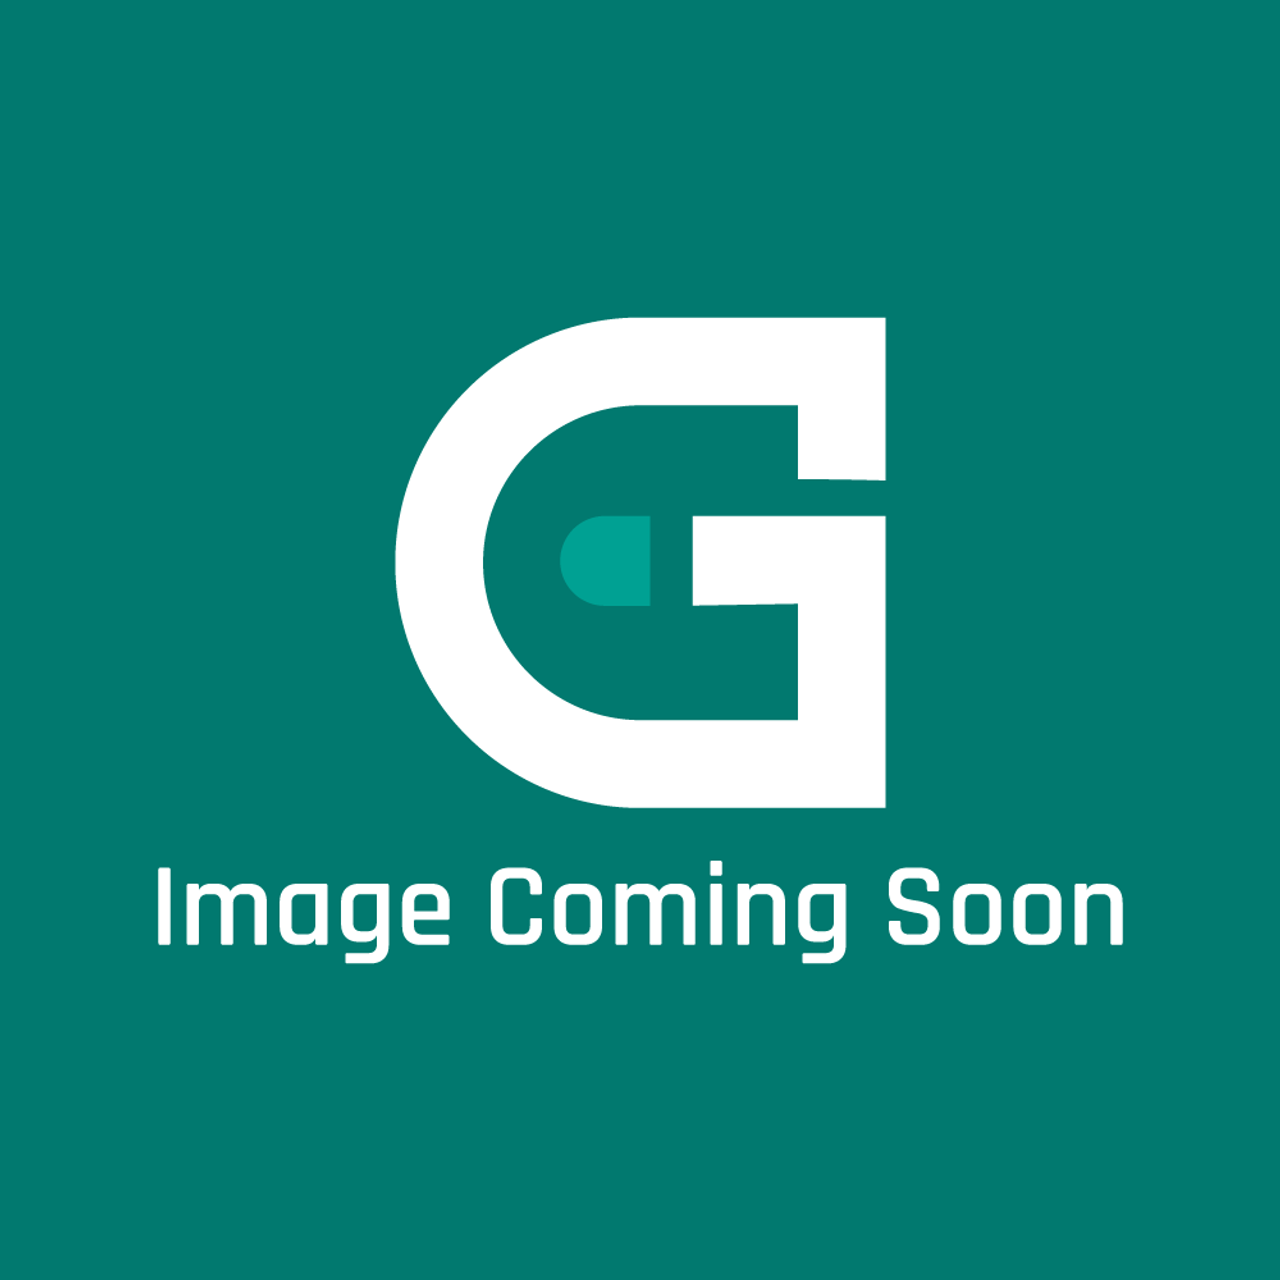 GE Appliances WB58K10009 - Drawer Body - Image Coming Soon!